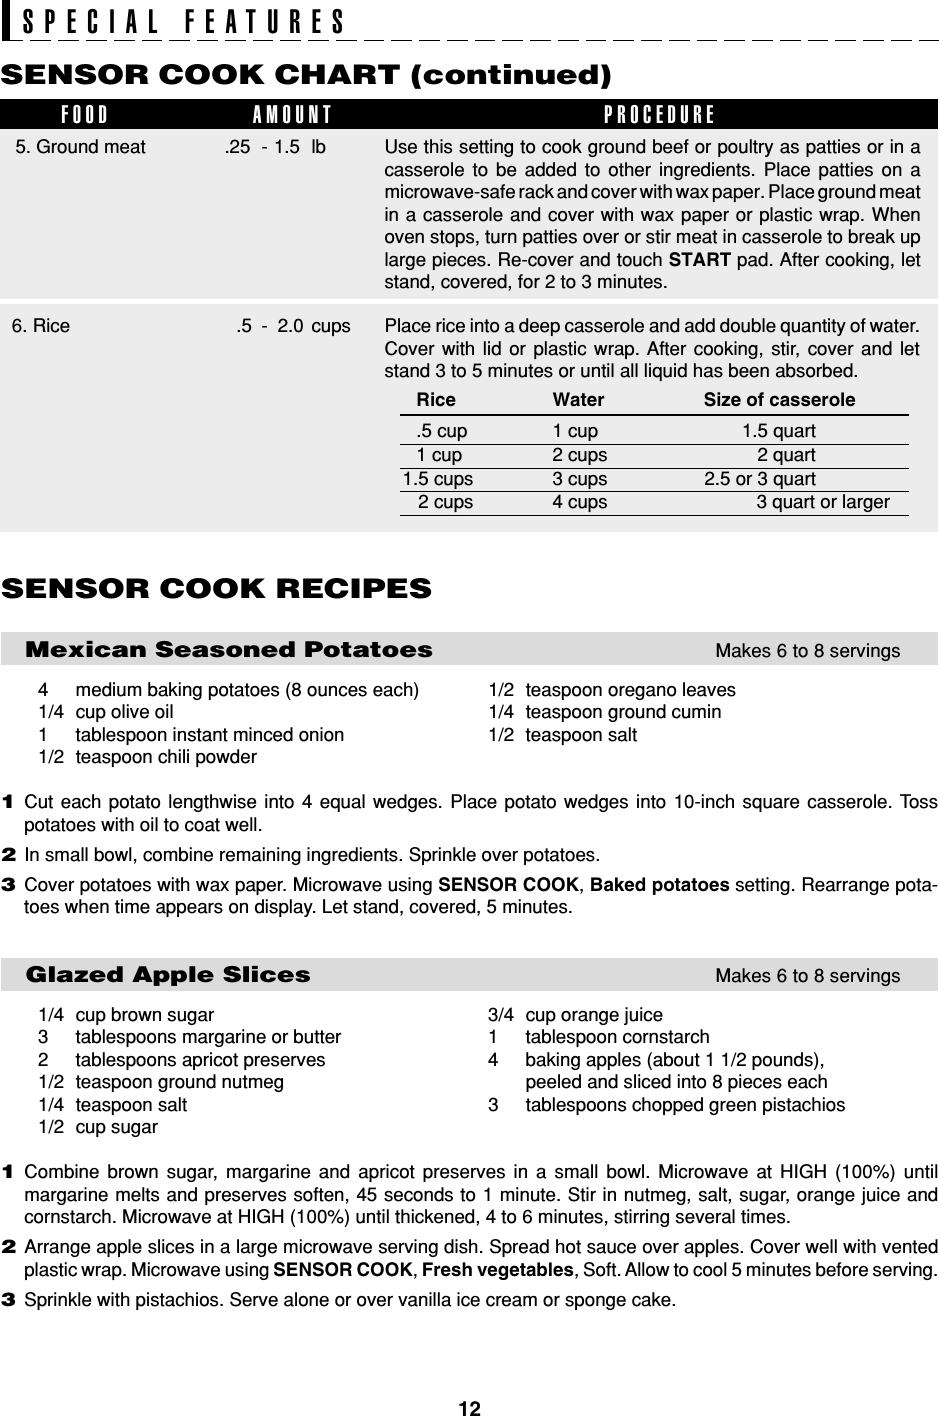 12SPECIAL FEATURESSENSOR COOK RECIPES   Mexican Seasoned PotatoesMakes 6 to 8 servings4 medium baking potatoes (8 ounces each) 1/2 teaspoon oregano leaves1/4 cup olive oil 1/4 teaspoon ground cumin1 tablespoon instant minced onion 1/2 teaspoon salt1/2 teaspoon chili powder1Cut each potato lengthwise into 4 equal wedges. Place potato wedges into 10-inch square casserole. Tosspotatoes with oil to coat well.2In small bowl, combine remaining ingredients. Sprinkle over potatoes.3Cover potatoes with wax paper. Microwave using SENSOR COOK, Baked potatoes setting. Rearrange pota-toes when time appears on display. Let stand, covered, 5 minutes.   Glazed Apple SlicesMakes 6 to 8 servings1/4 cup brown sugar 3/4 cup orange juice3 tablespoons margarine or butter 1 tablespoon cornstarch2 tablespoons apricot preserves 4 baking apples (about 1 1/2 pounds),1/2 teaspoon ground nutmeg peeled and sliced into 8 pieces each1/4 teaspoon salt 3 tablespoons chopped green pistachios1/2 cup sugar1Combine brown sugar, margarine and apricot preserves in a small bowl. Microwave at HIGH (100%) untilmargarine melts and preserves soften, 45 seconds to 1 minute. Stir in nutmeg, salt, sugar, orange juice andcornstarch. Microwave at HIGH (100%) until thickened, 4 to 6 minutes, stirring several times.2Arrange apple slices in a large microwave serving dish. Spread hot sauce over apples. Cover well with ventedplastic wrap. Microwave using SENSOR COOK, Fresh vegetables, Soft. Allow to cool 5 minutes before serving.3Sprinkle with pistachios. Serve alone or over vanilla ice cream or sponge cake.SENSOR COOK CHART (continued)FOOD AMOUNT PROCEDUREUse this setting to cook ground beef or poultry as patties or in acasserole to be added to other ingredients. Place patties on amicrowave-safe rack and cover with wax paper. Place ground meatin a casserole and cover with wax paper or plastic wrap. Whenoven stops, turn patties over or stir meat in casserole to break uplarge pieces. Re-cover and touch START pad. After cooking, letstand, covered, for 2 to 3 minutes.5. Ground meat .25 - 1.5 lbPlace rice into a deep casserole and add double quantity of water.Cover with lid or plastic wrap. After cooking, stir, cover and letstand 3 to 5 minutes or until all liquid has been absorbed.  6. Rice .5 - 2.0 cupsRice Water Size of casserole.5 cup 1 cup 1.5 quart1 cup 2 cups 2 quart1.5 cups 3 cups 2.5 or 3 quart   2 cups 4 cups           3 quart or larger